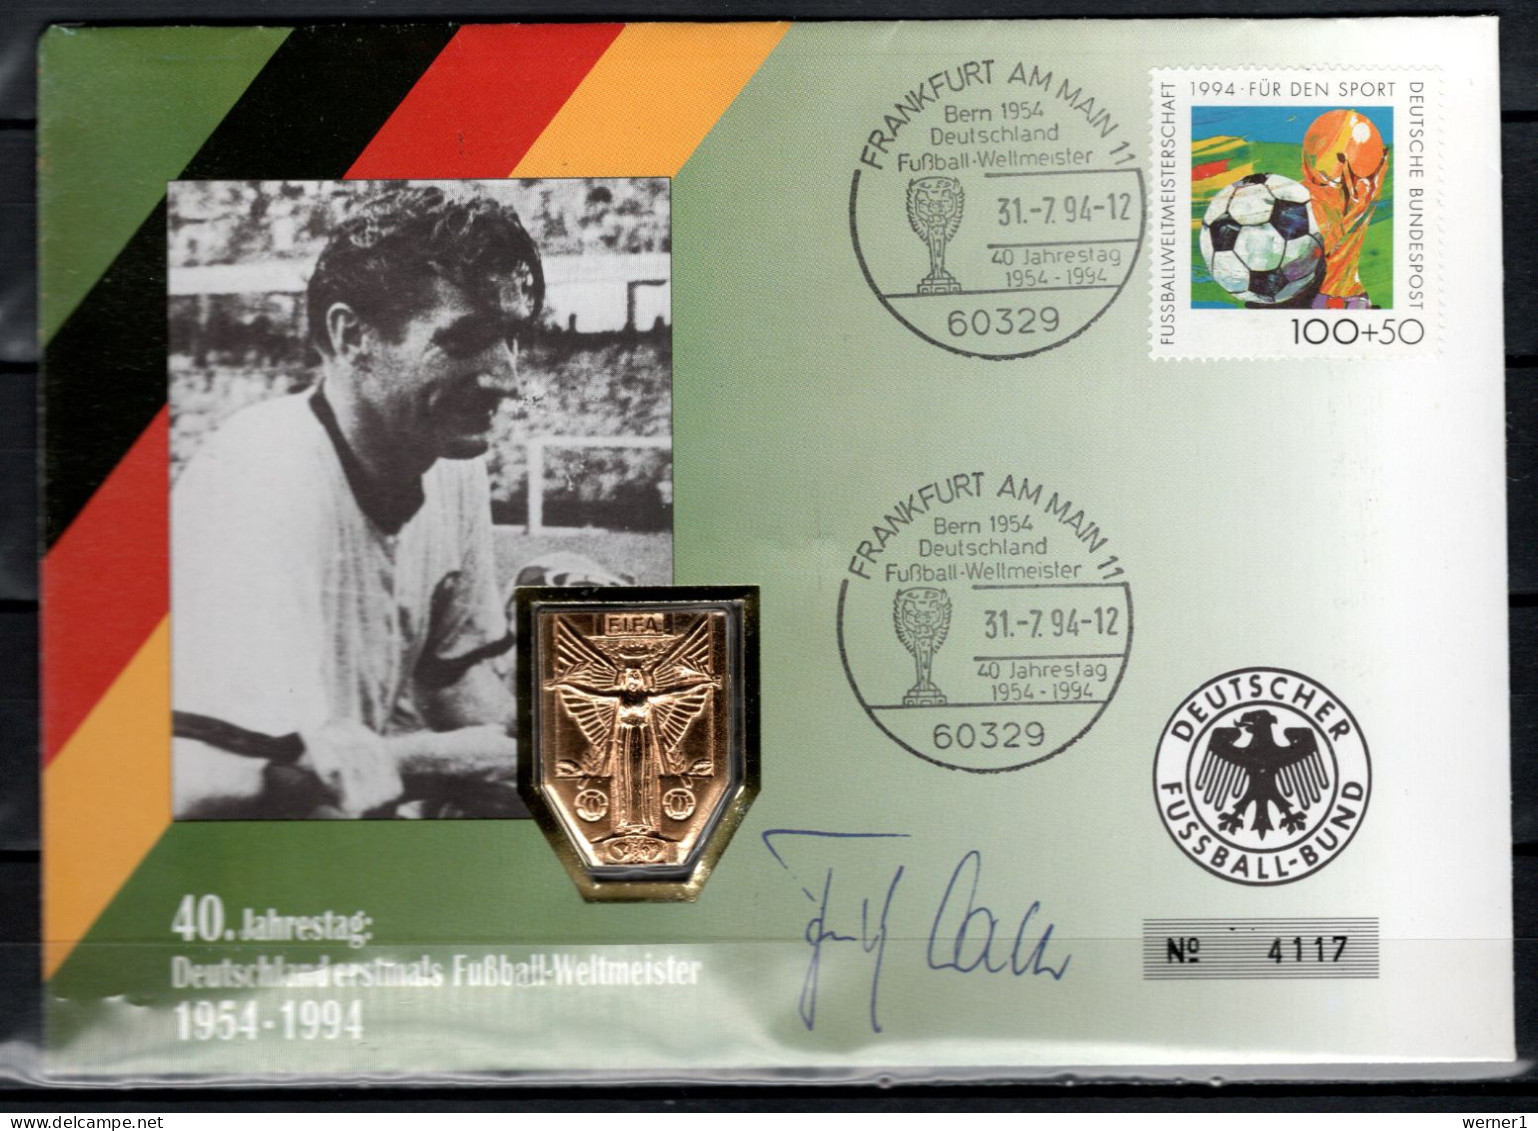 Germany 1994 Football Soccer World Cup Commemorative Cover With Medal And Original Signature Of Fritz Walter - 1994 – Stati Uniti